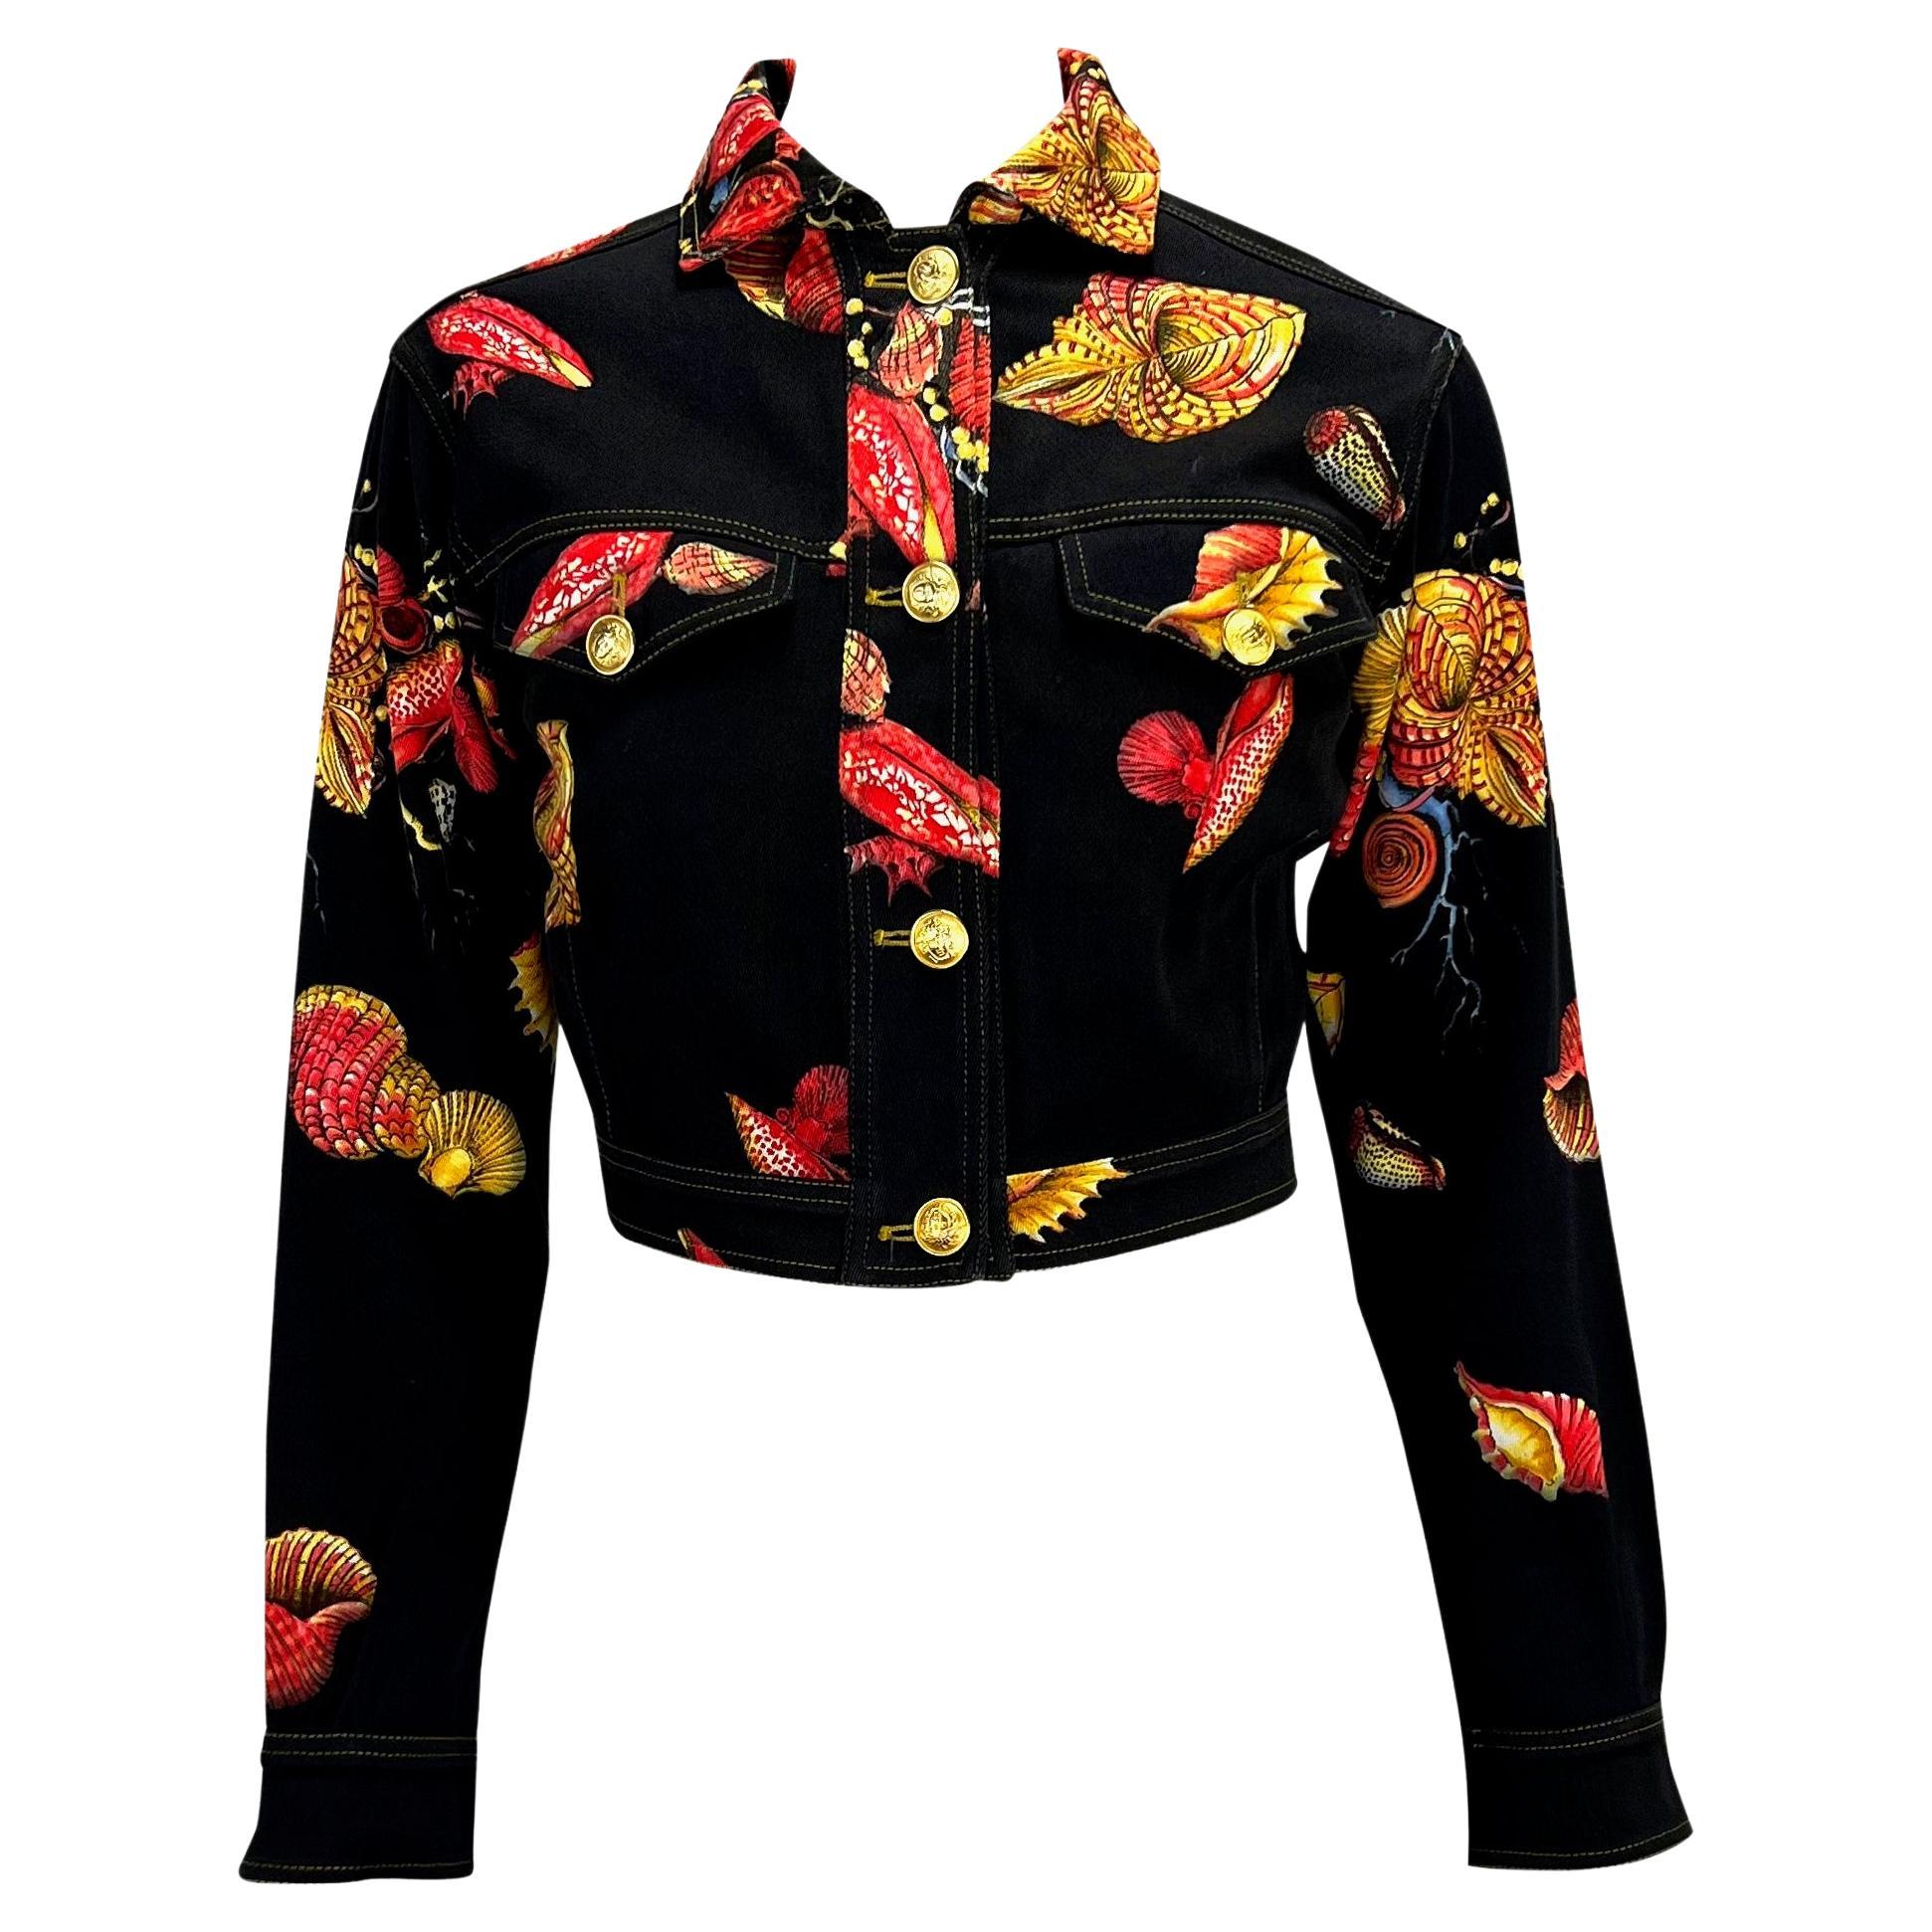 S/S 1992 Gianni Versace Seashell Print Black Denim Medusa Cropped Jacket  For Sale at 1stDibs | miss chile 1992, versace cropped jacket